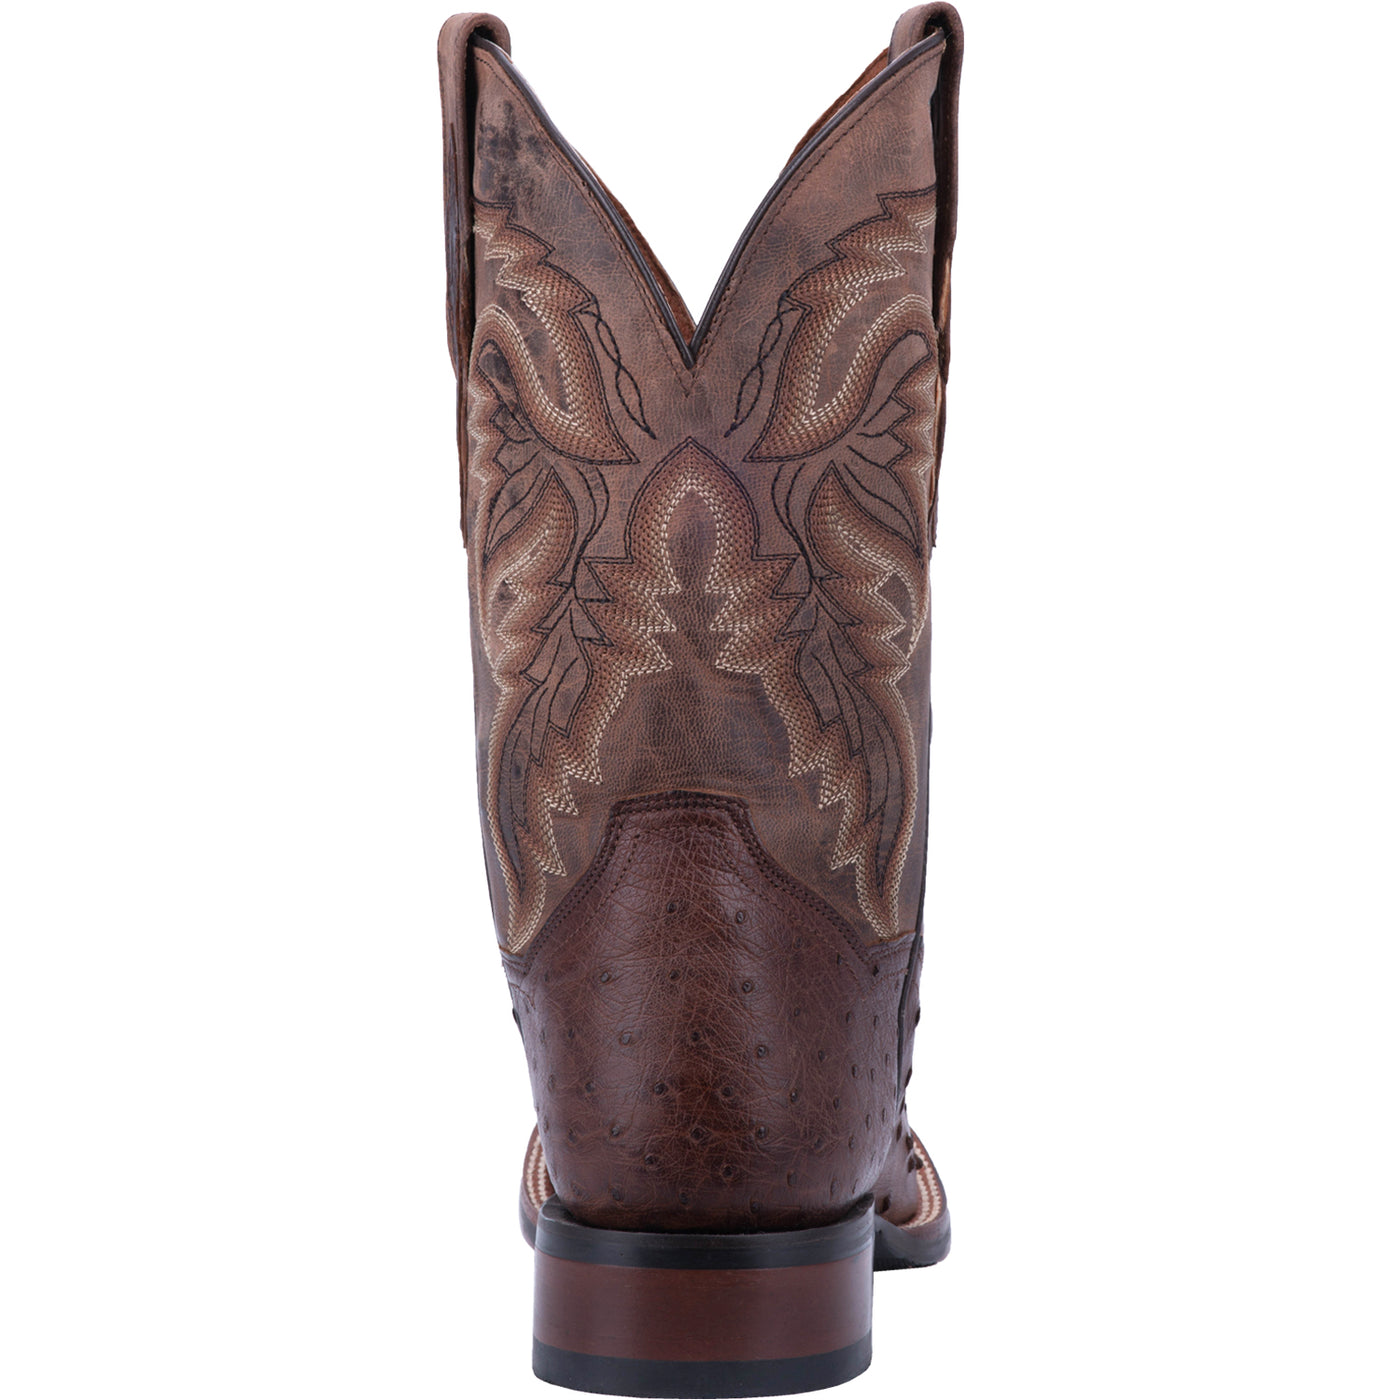 The rugged yet refined Cowboy Certified Alamosa boot is crafted with a genuine full quill ostrich skin foot and a leather shaft. It is fully leather lined and features a Soft Strike Removable Orthotic that provides everyday comfort.  Style: DP3875